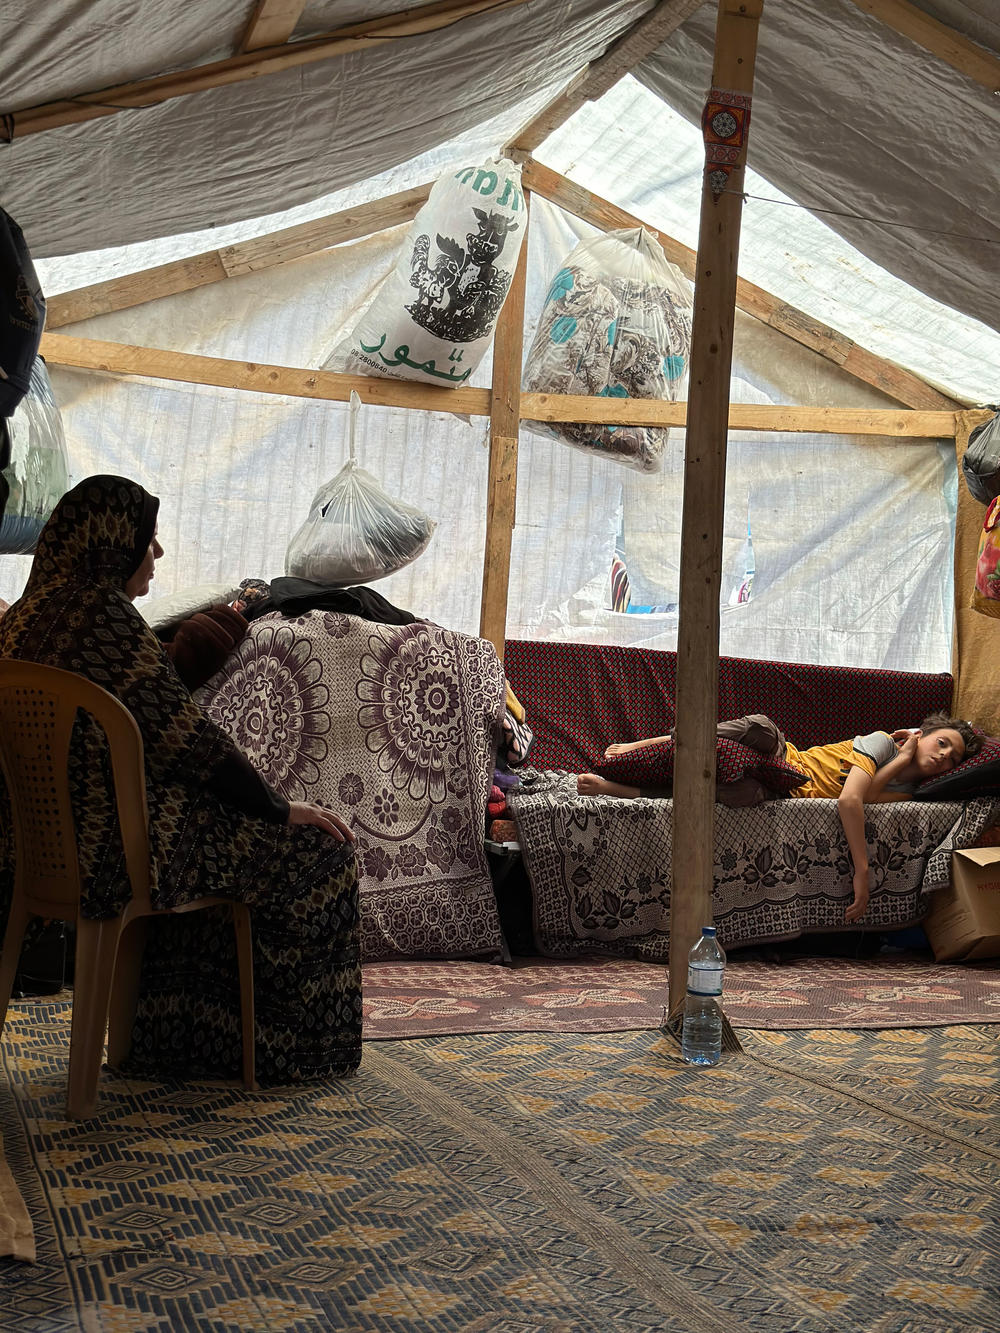 Nimer has been separated from his family, who are still in Gaza City. He is being cared for by his grandmother and uncle in a makeshift tent in a refugee camp in Rafah. They're trying to find better medical care for Nimer, who suffers from mild seizures and an ongoing fever since his surgery.